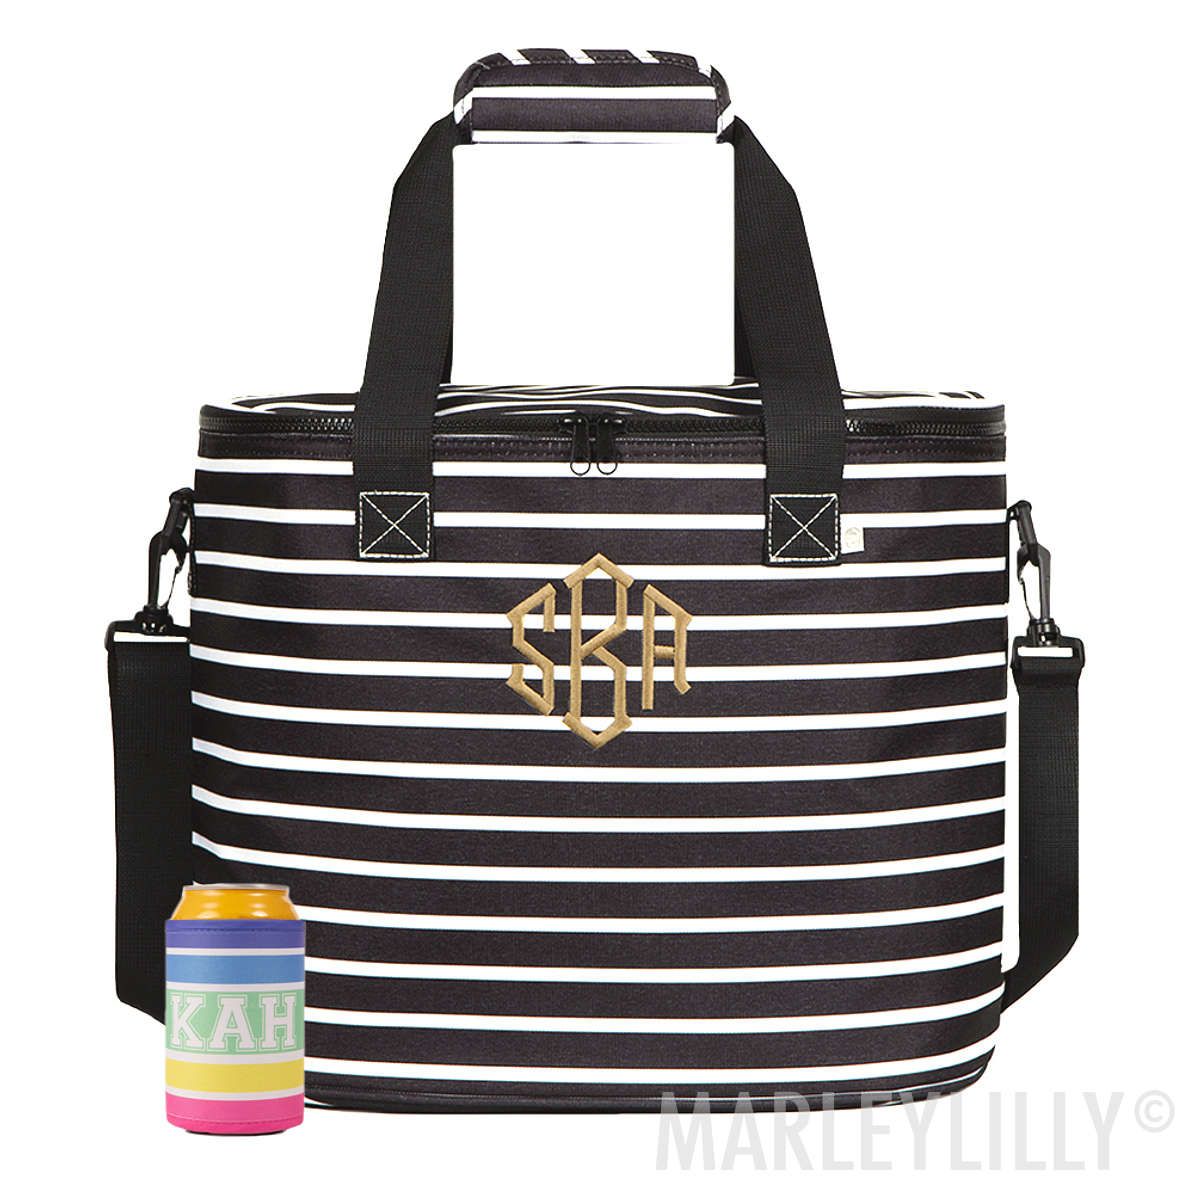 Personalized Cooler | Marleylilly